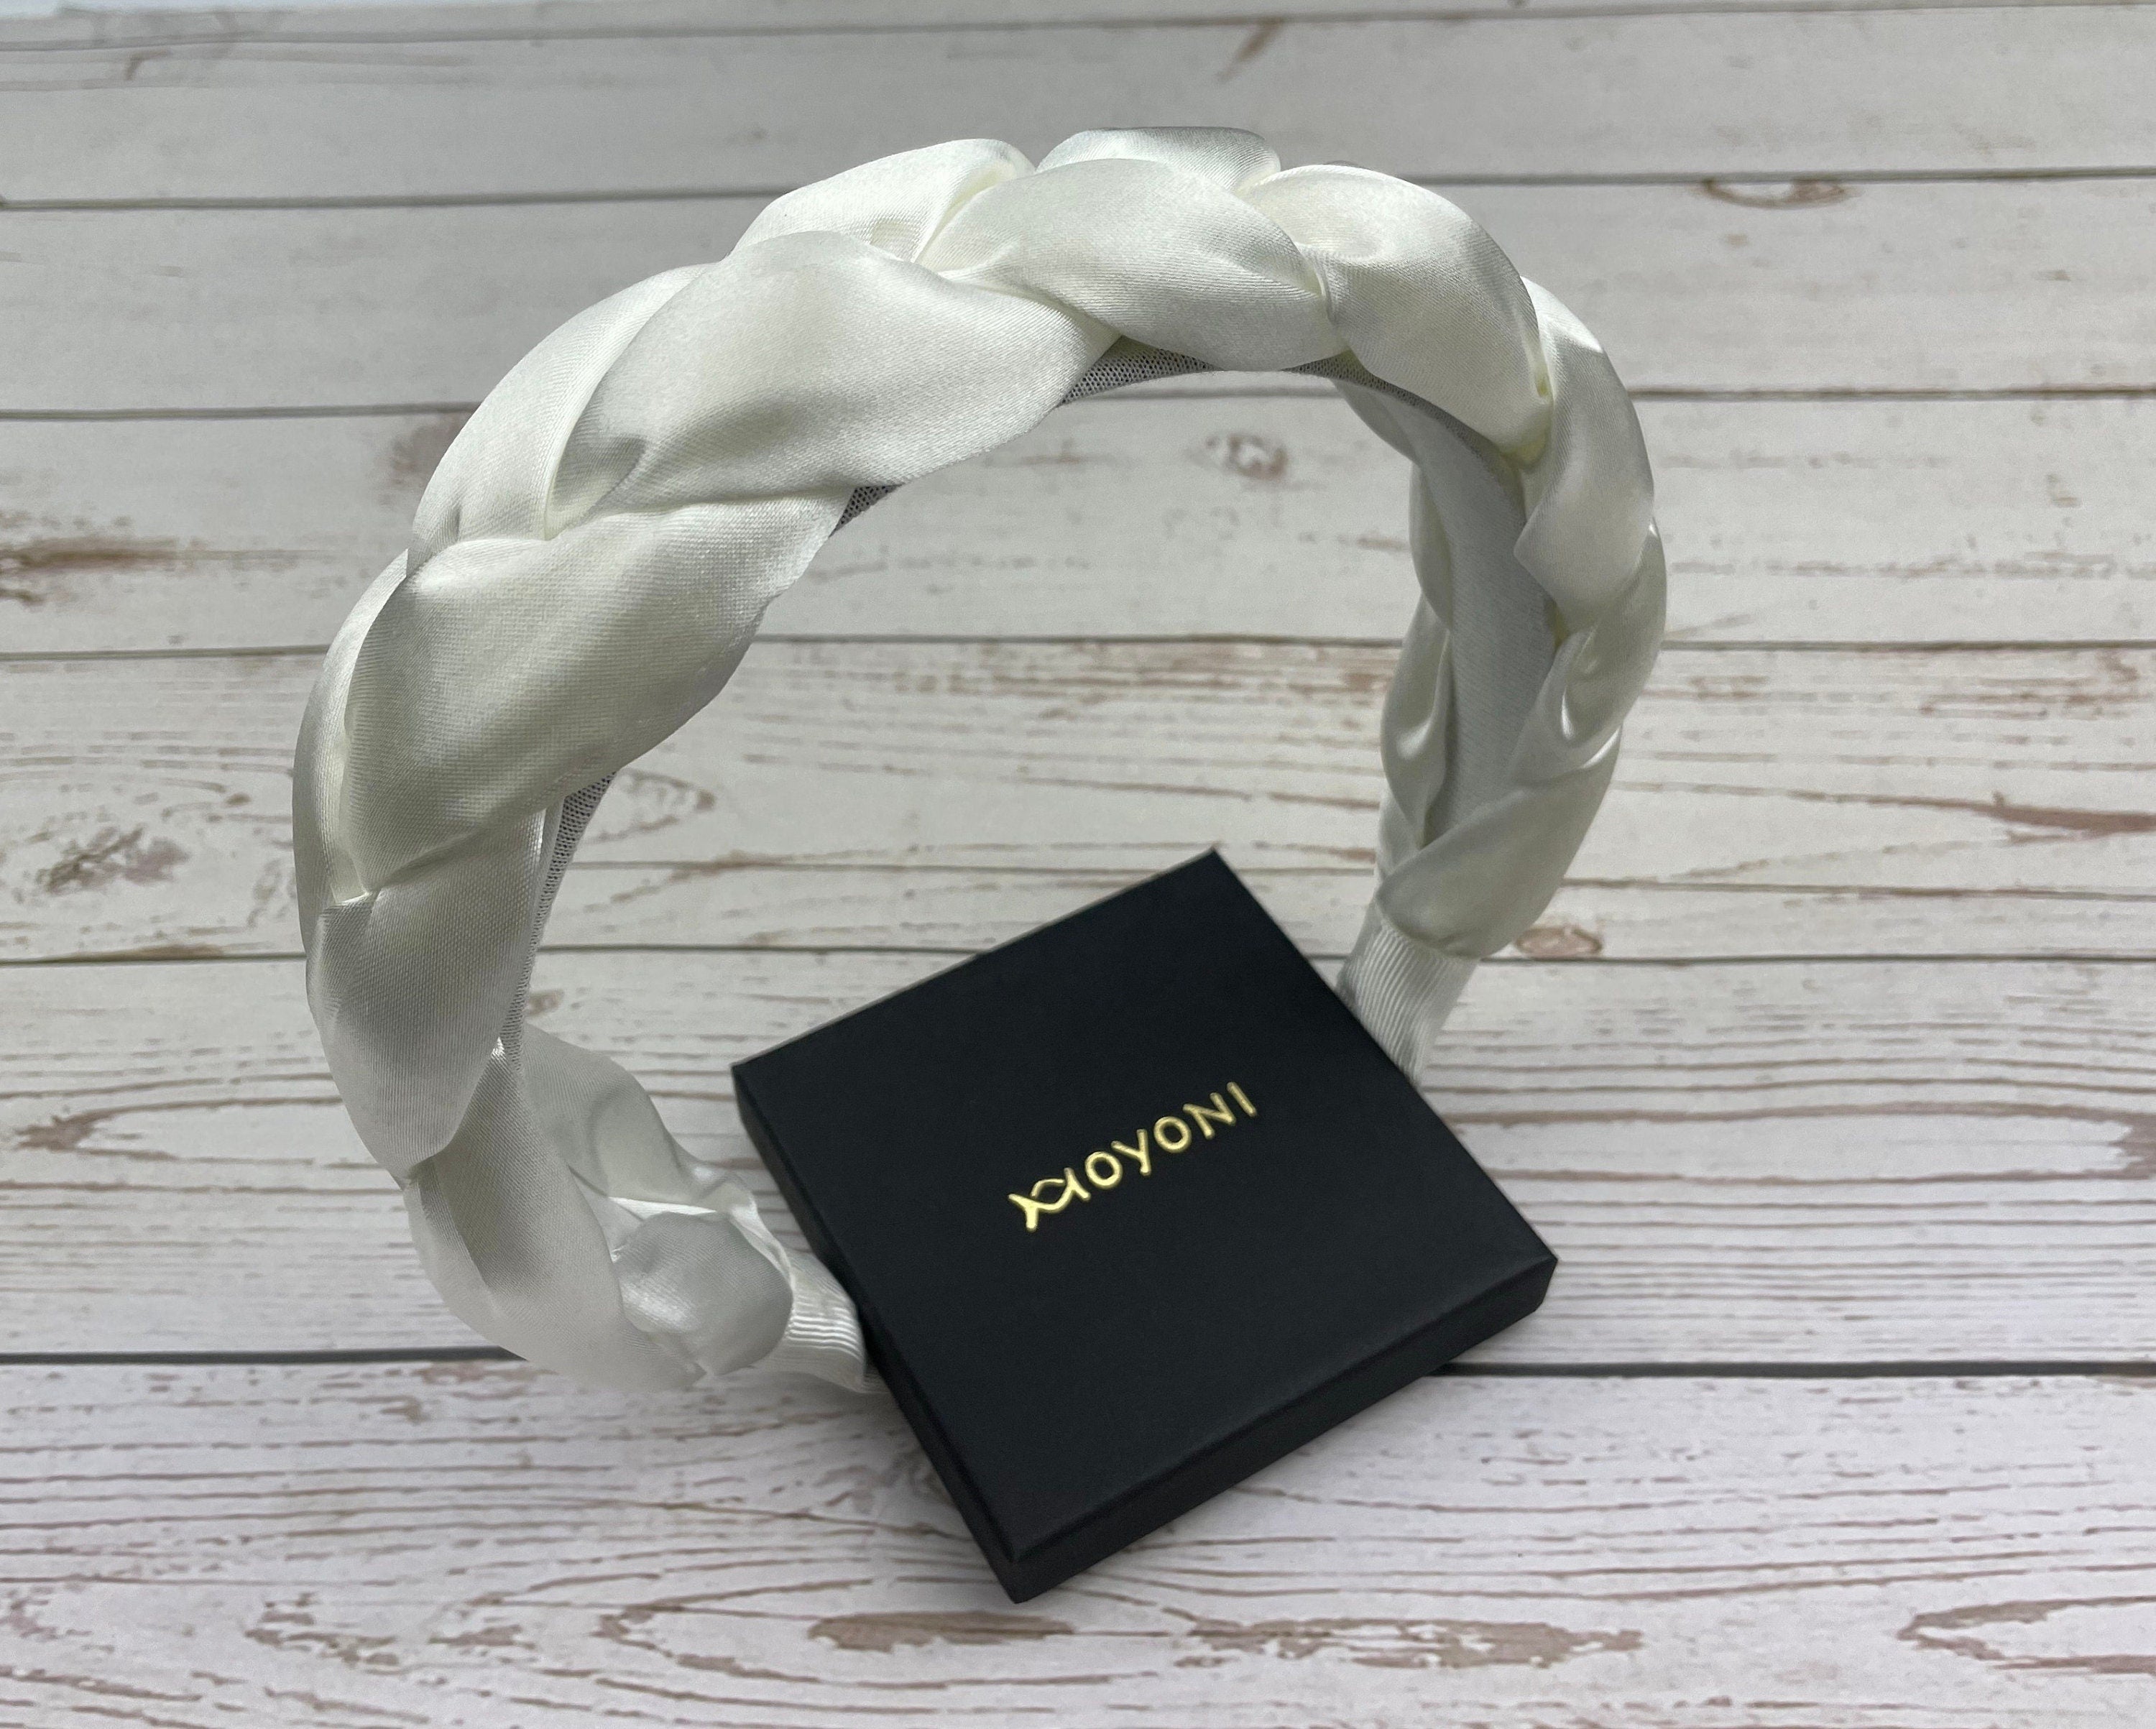 Stay comfortable and fashionable at any celebration with this Snow White Padded Satin Knitted Headband. The plush satin padding and knitted design make it a must-have accessory for stylish women.